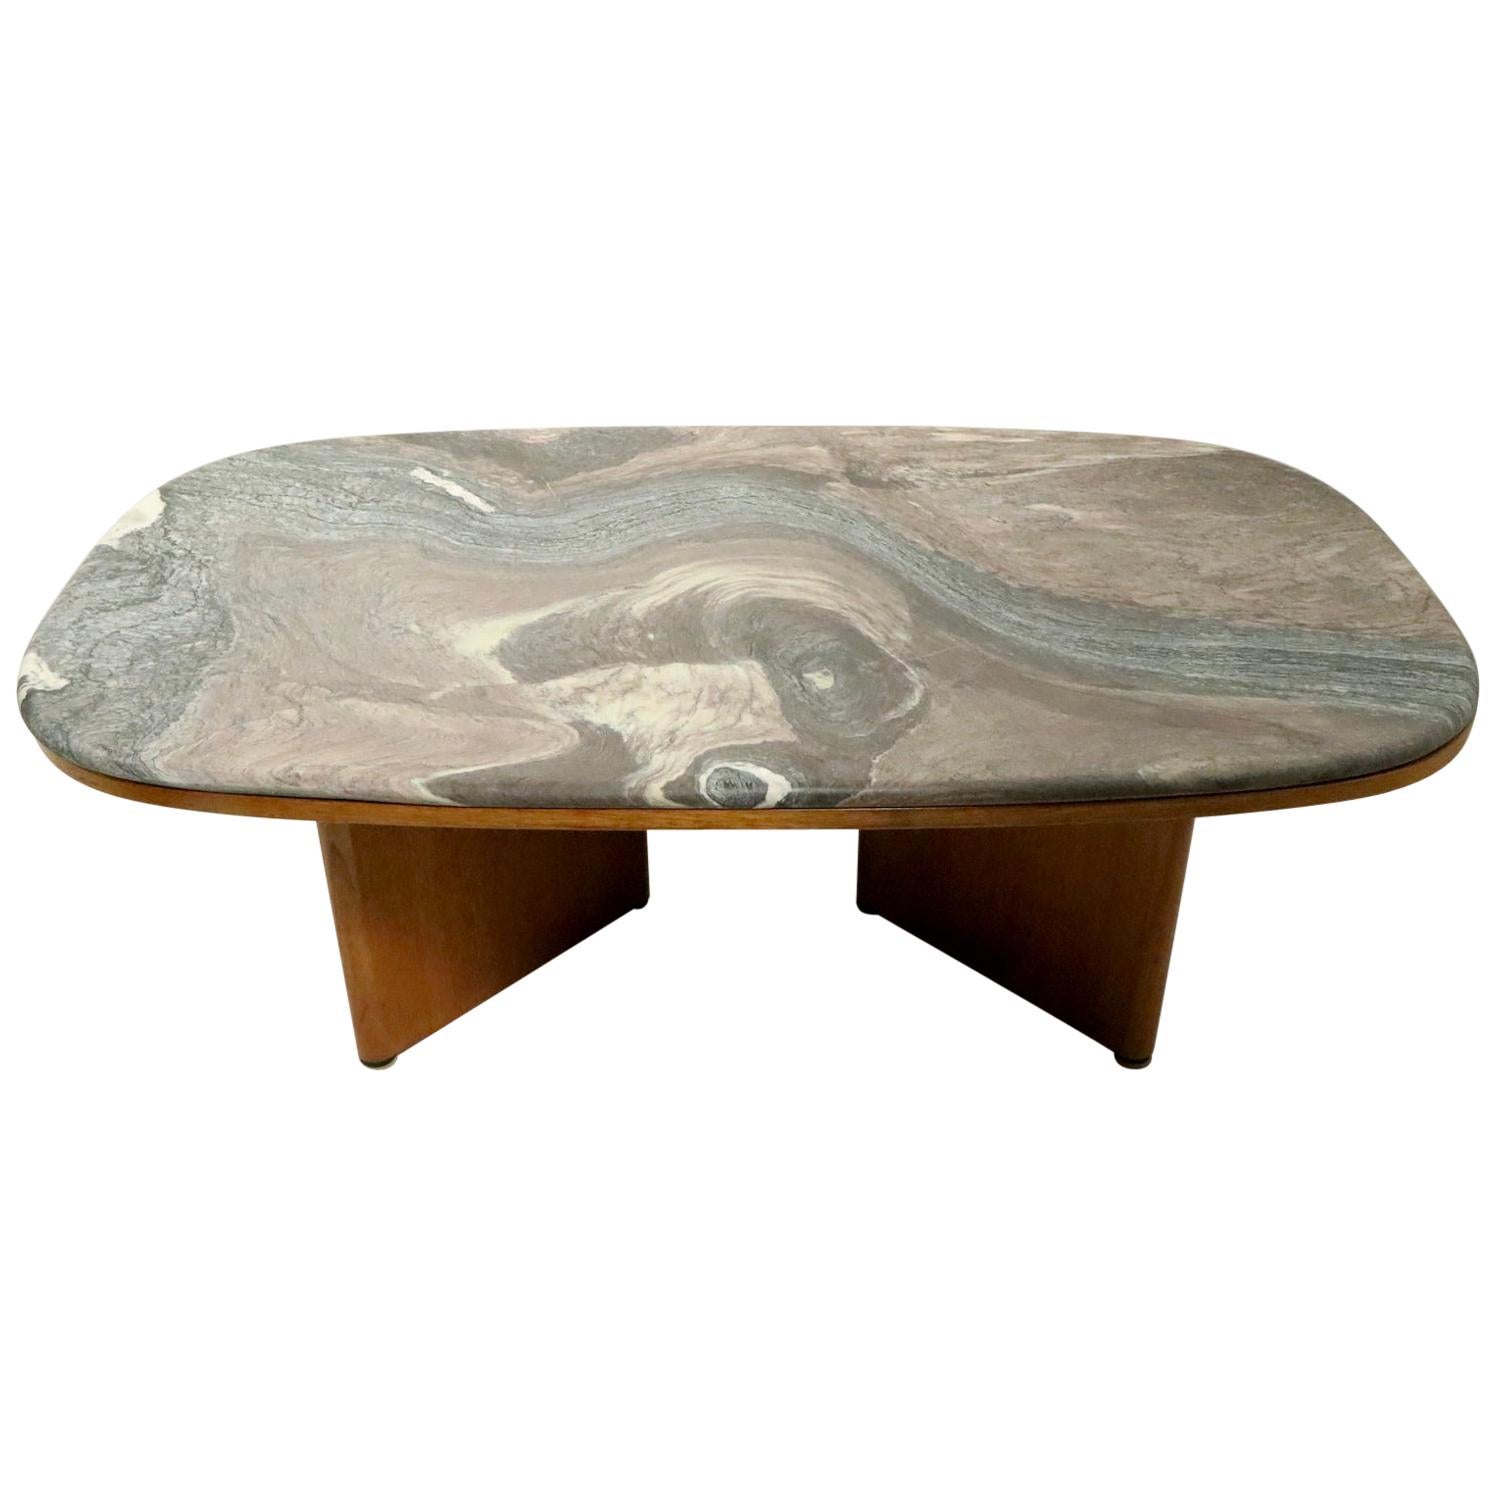 Marble-Top Danish Modern Coffee Table by Bendixon Made in Sweden